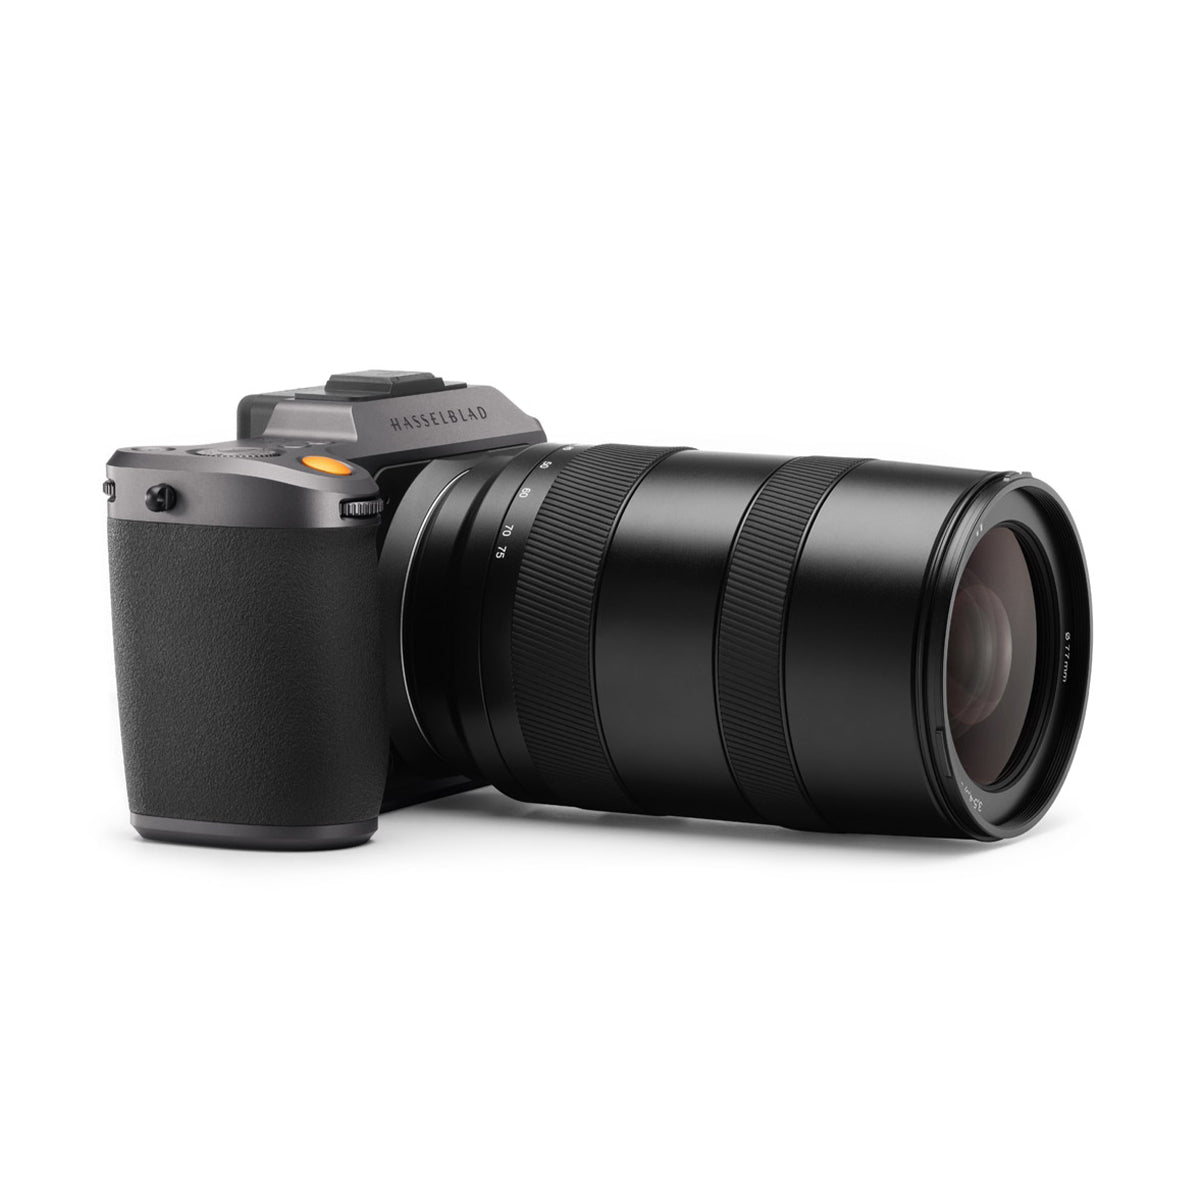 Hasselblad XCD 35-75mm f3.5-4.5 lens